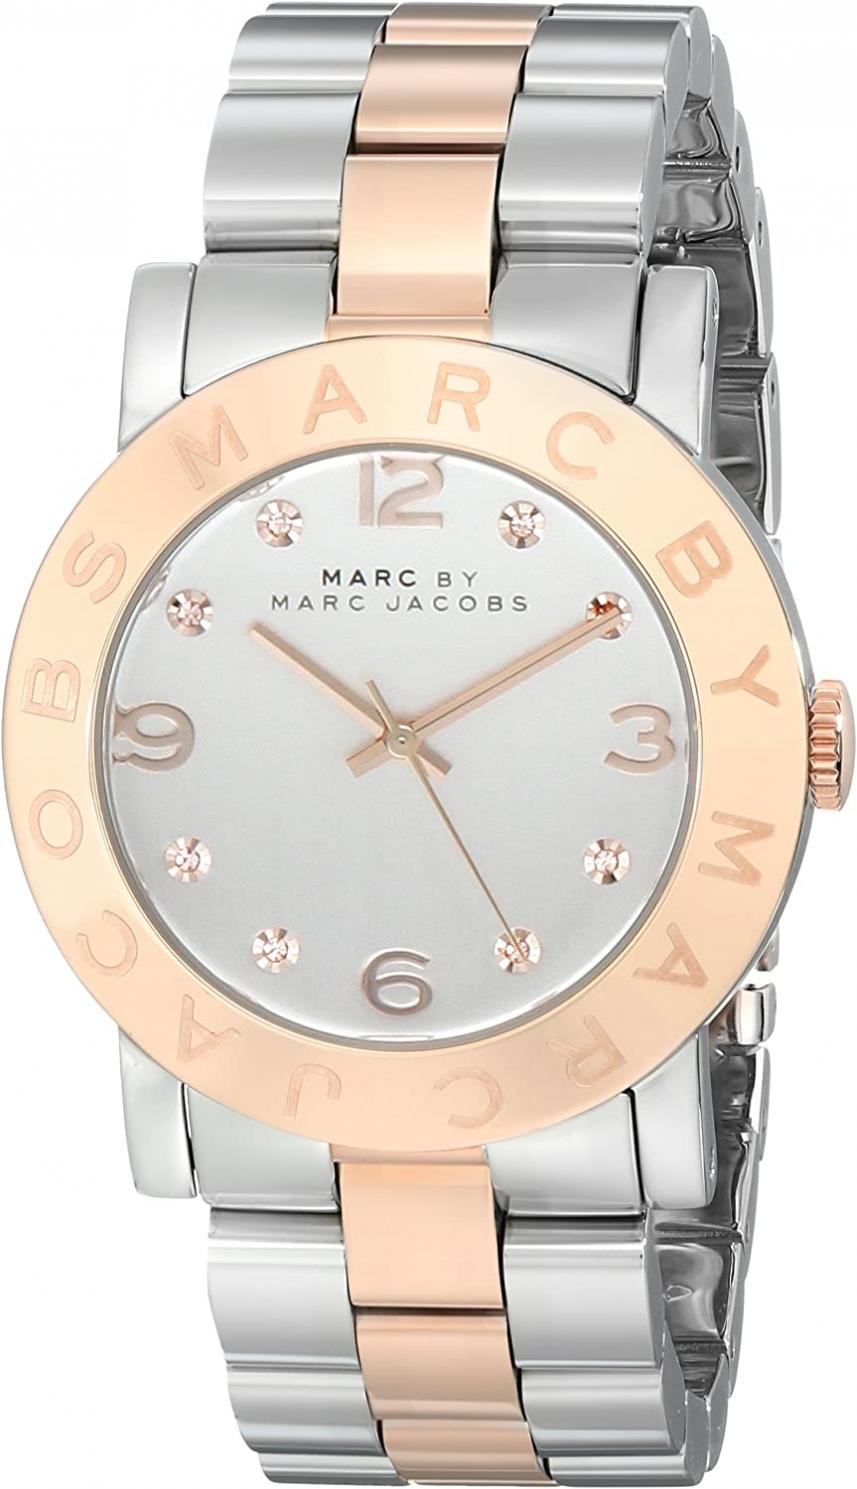 Marc by Marc Jacobs Women's MBM3194 Amy Two-Tone Stainless Steel Watch with Link Bracelet